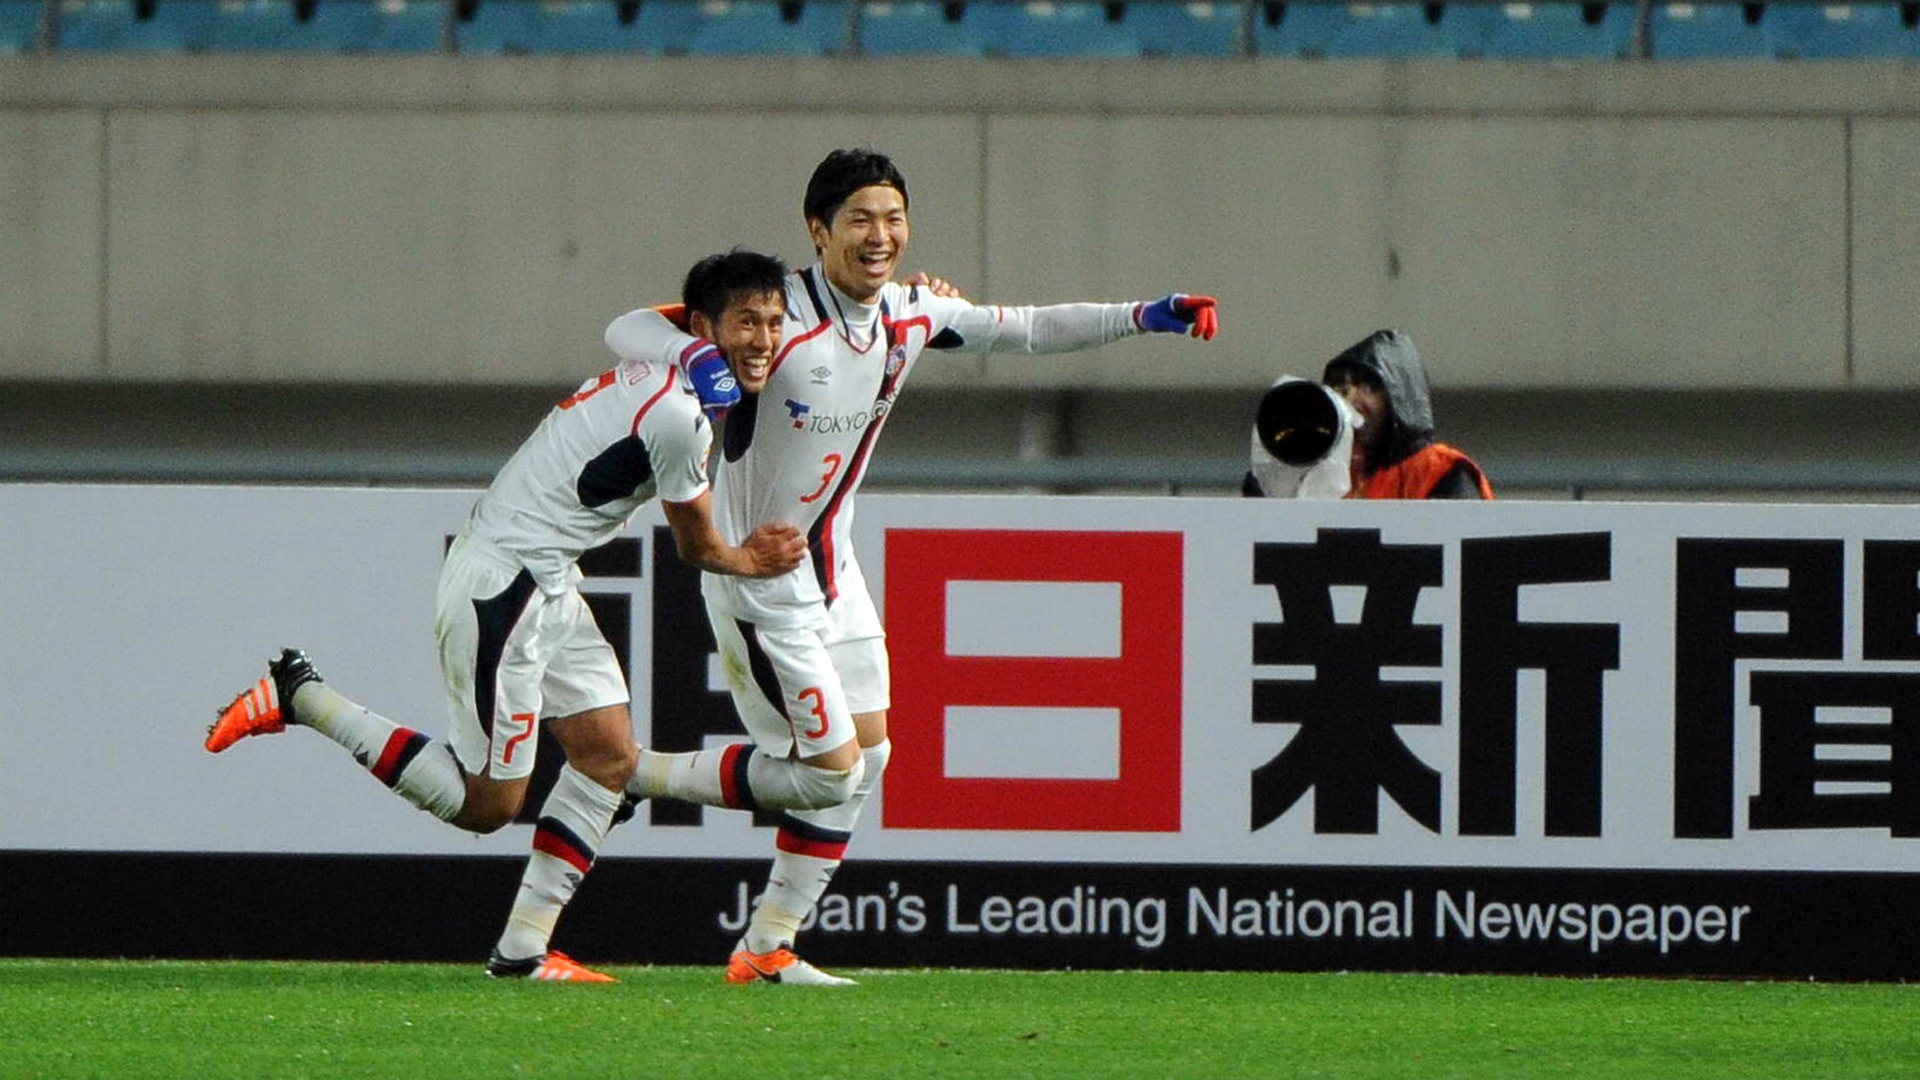 AFC Champions League Review: Tokyo defeat Jiangsu Suning, draw for Melbourne Victory